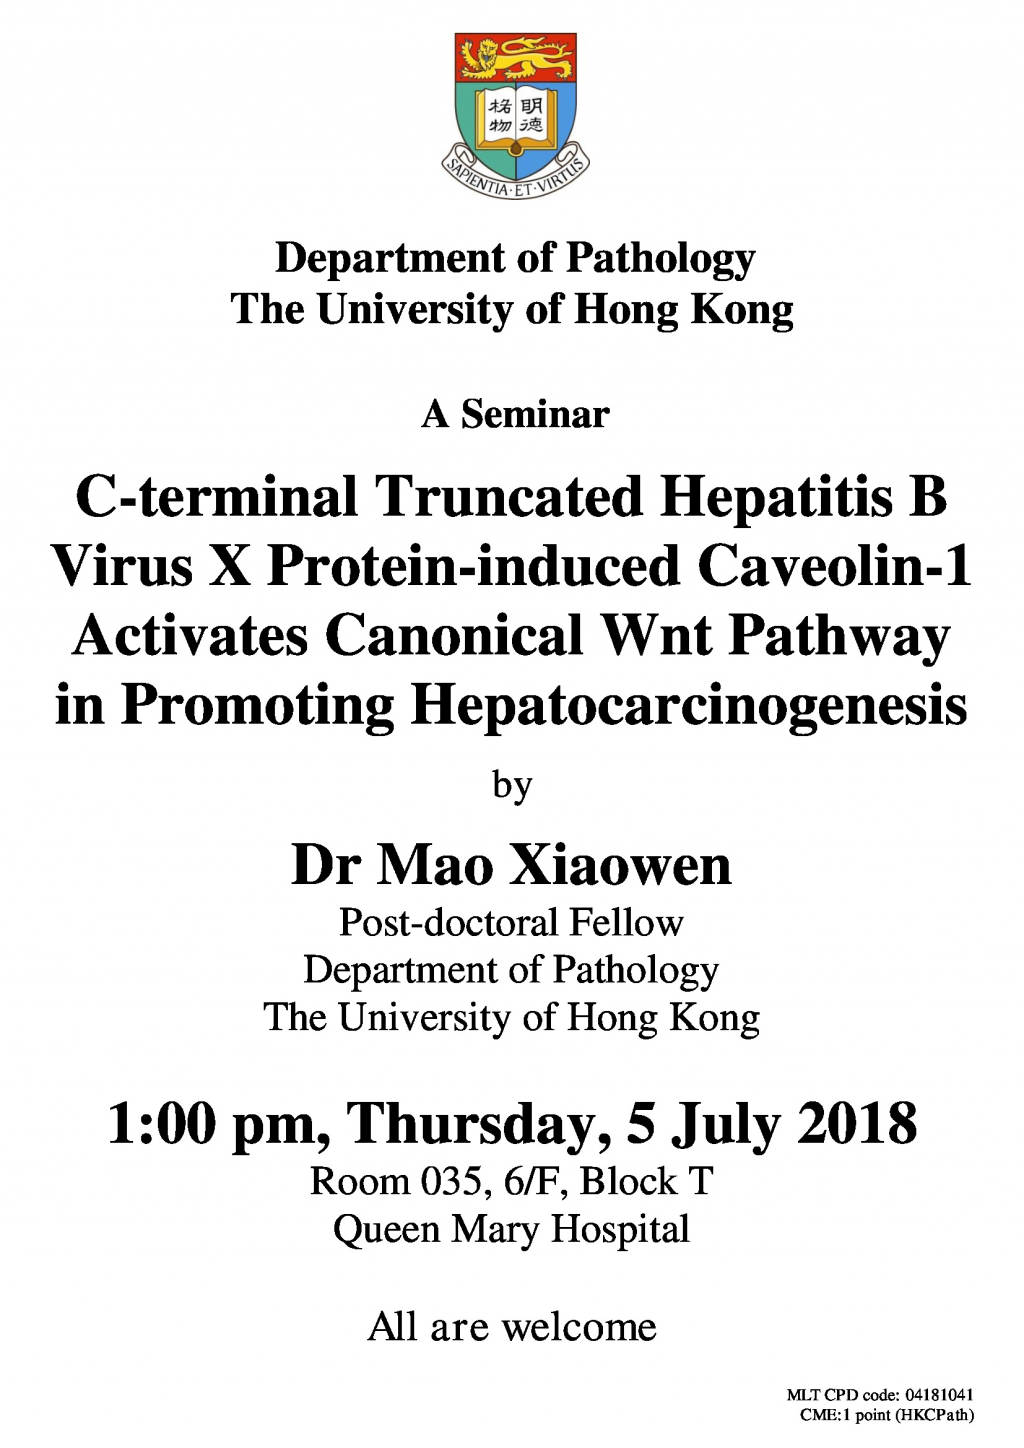 A Seminar by Dr Mao Xiaowen on 5 July (1 pm)